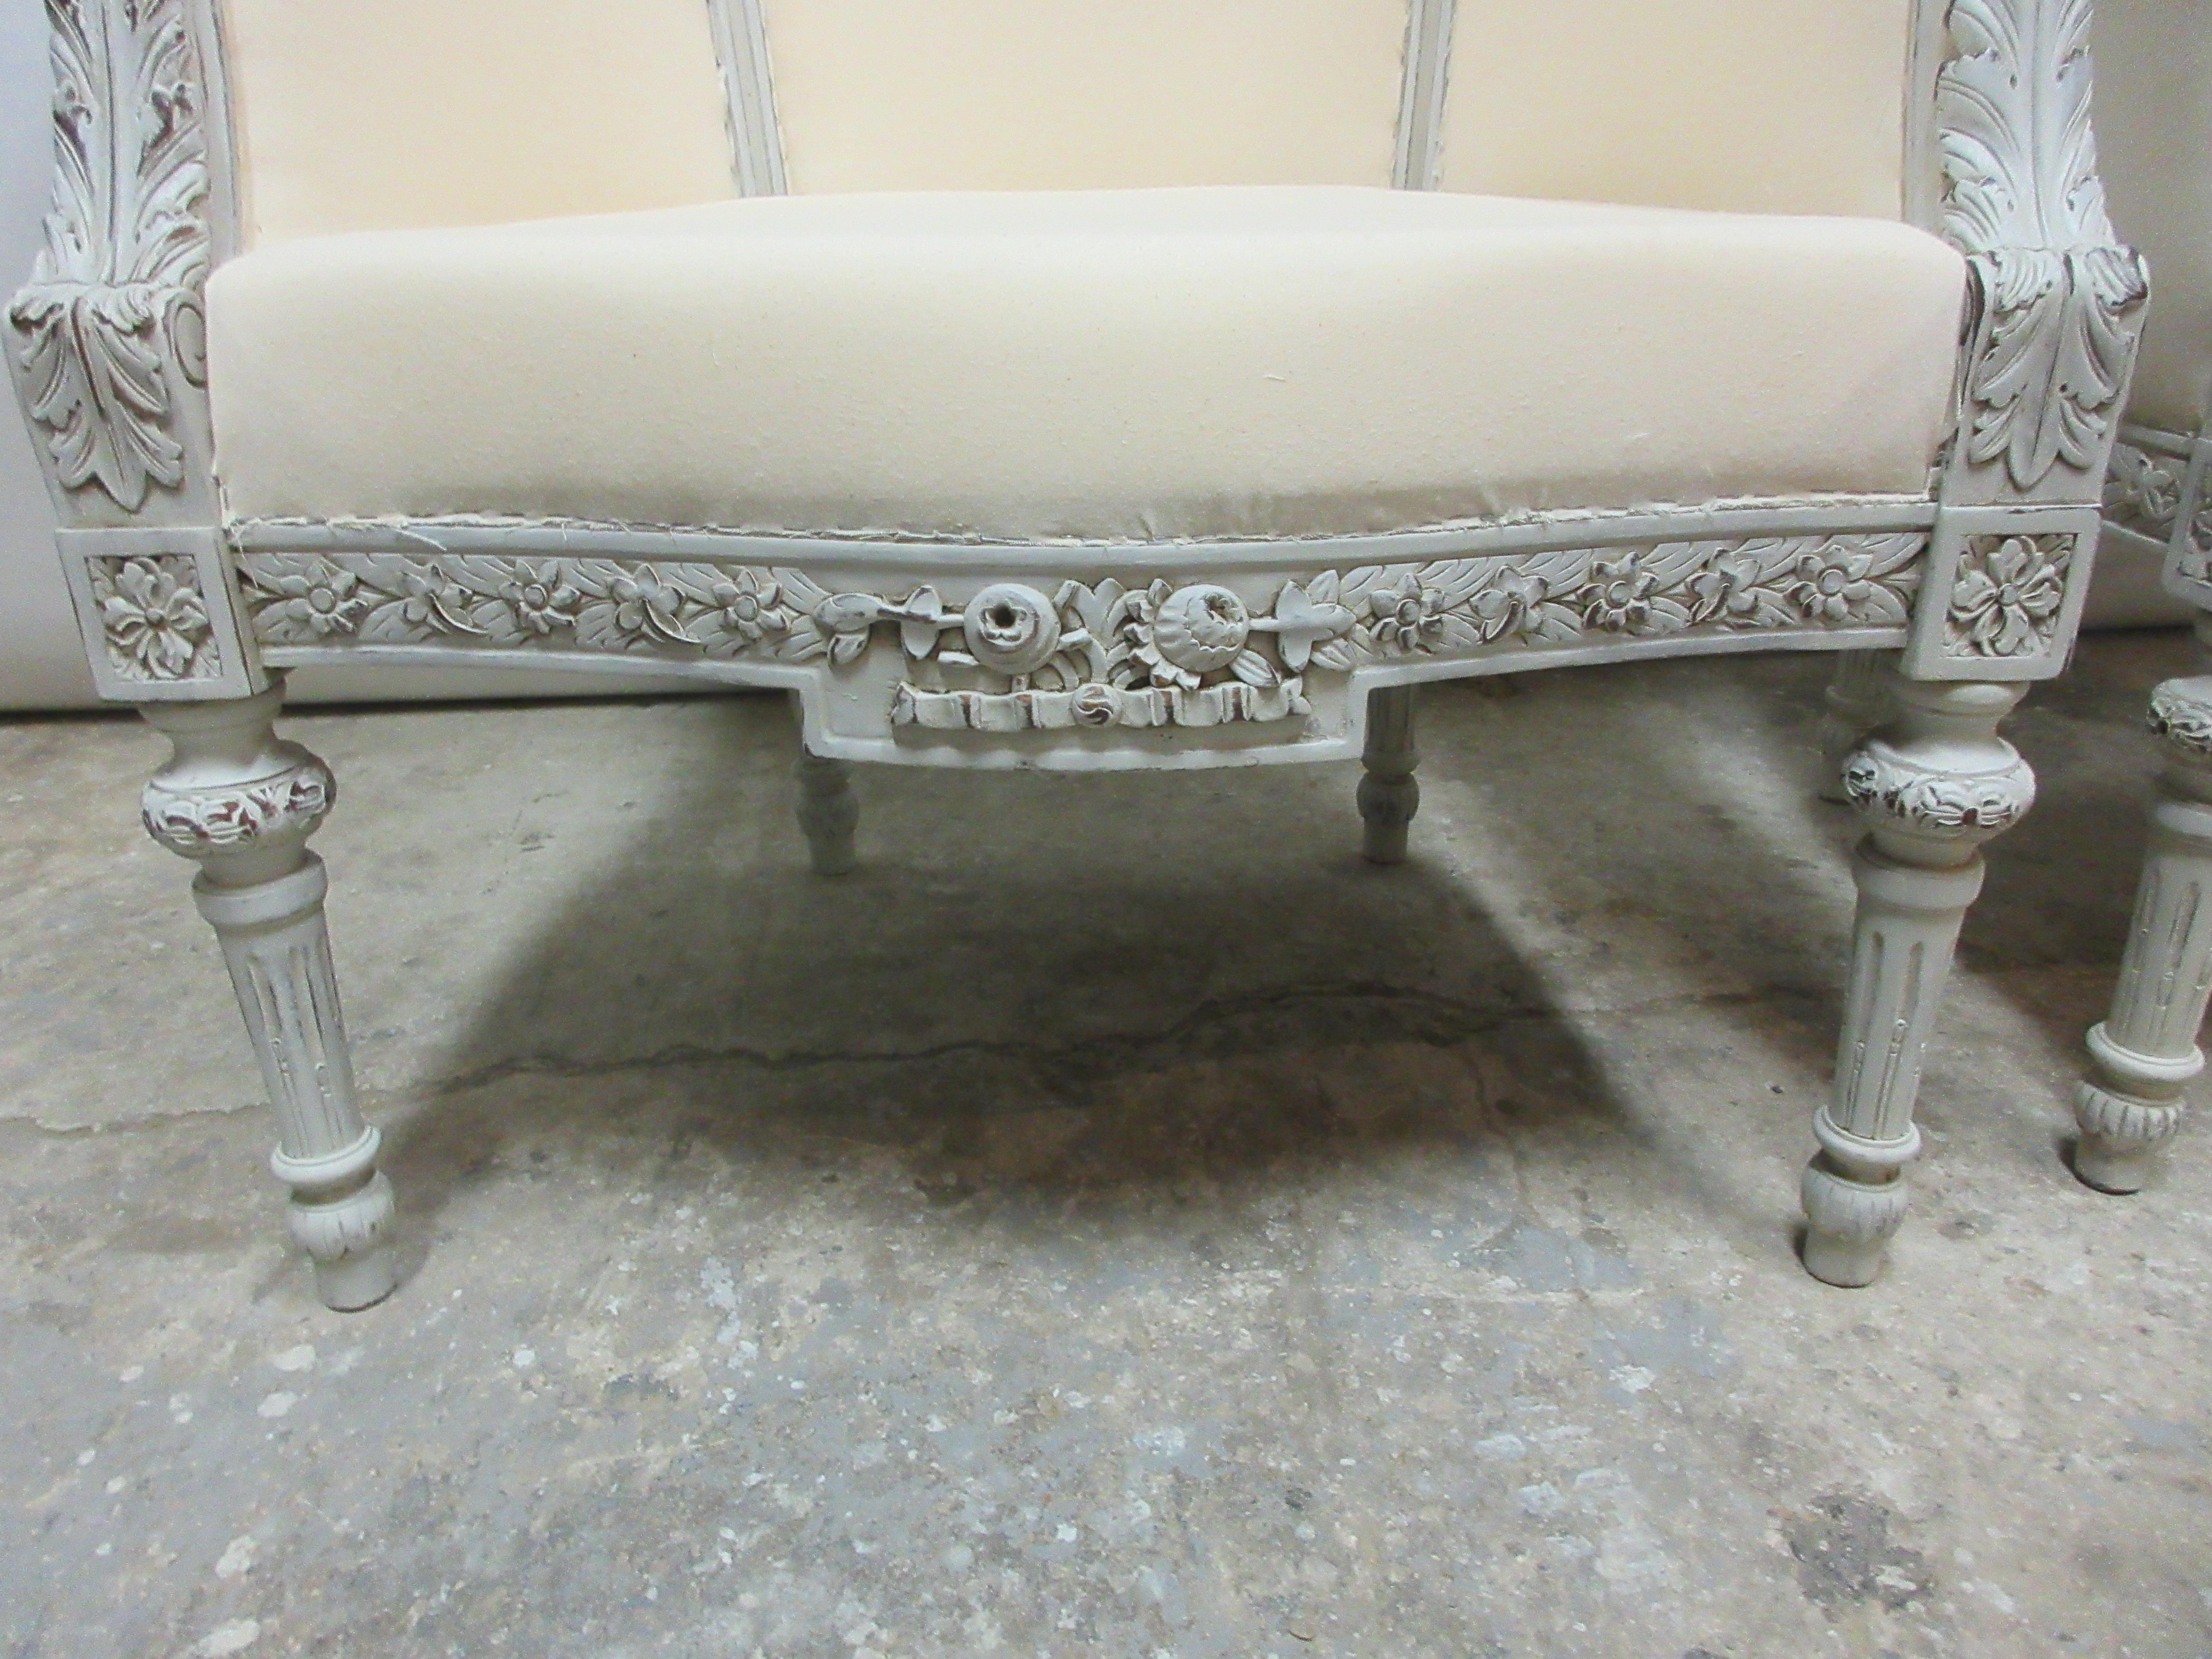 This is a set of 2 restored Gustavian bergere chairs. They have been repainted with milk paints 